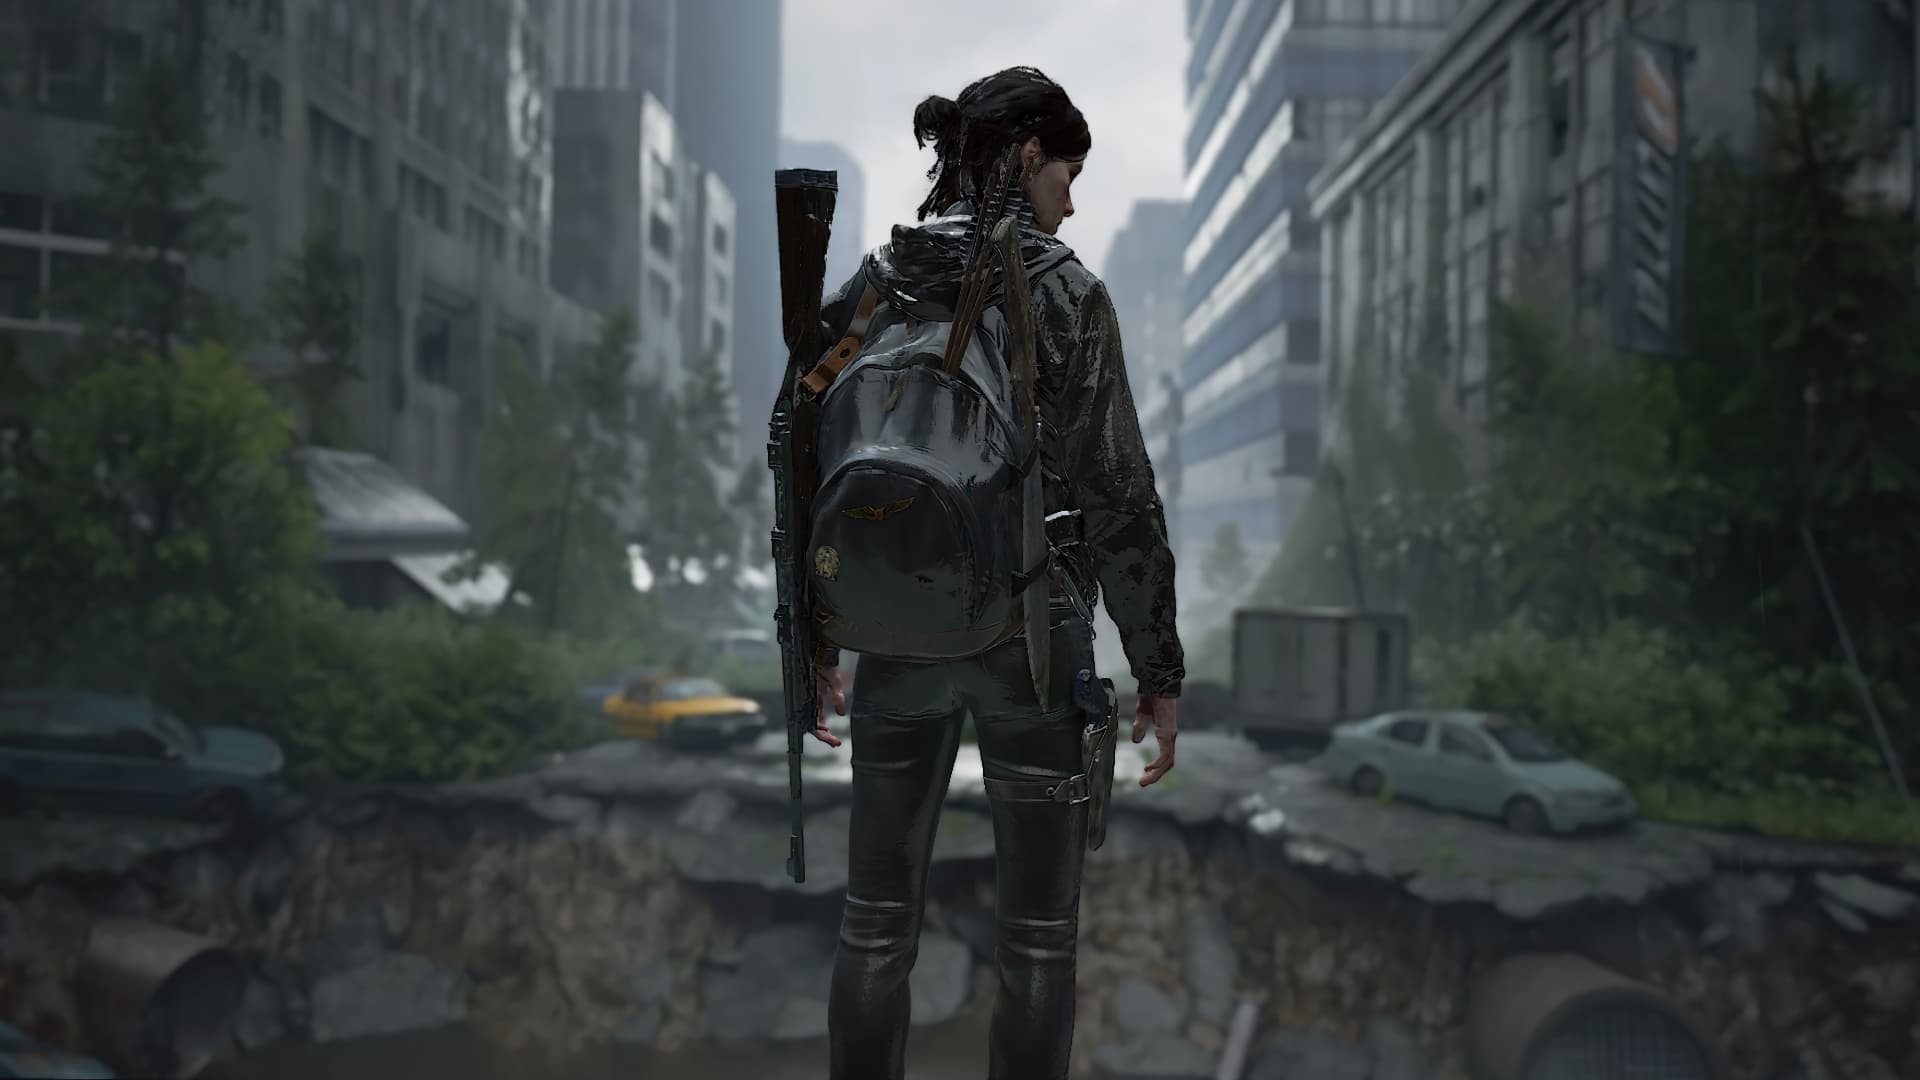 The Last Of Us' Season 2: Release Date, Spoilers, Cast, Trailer And Plot